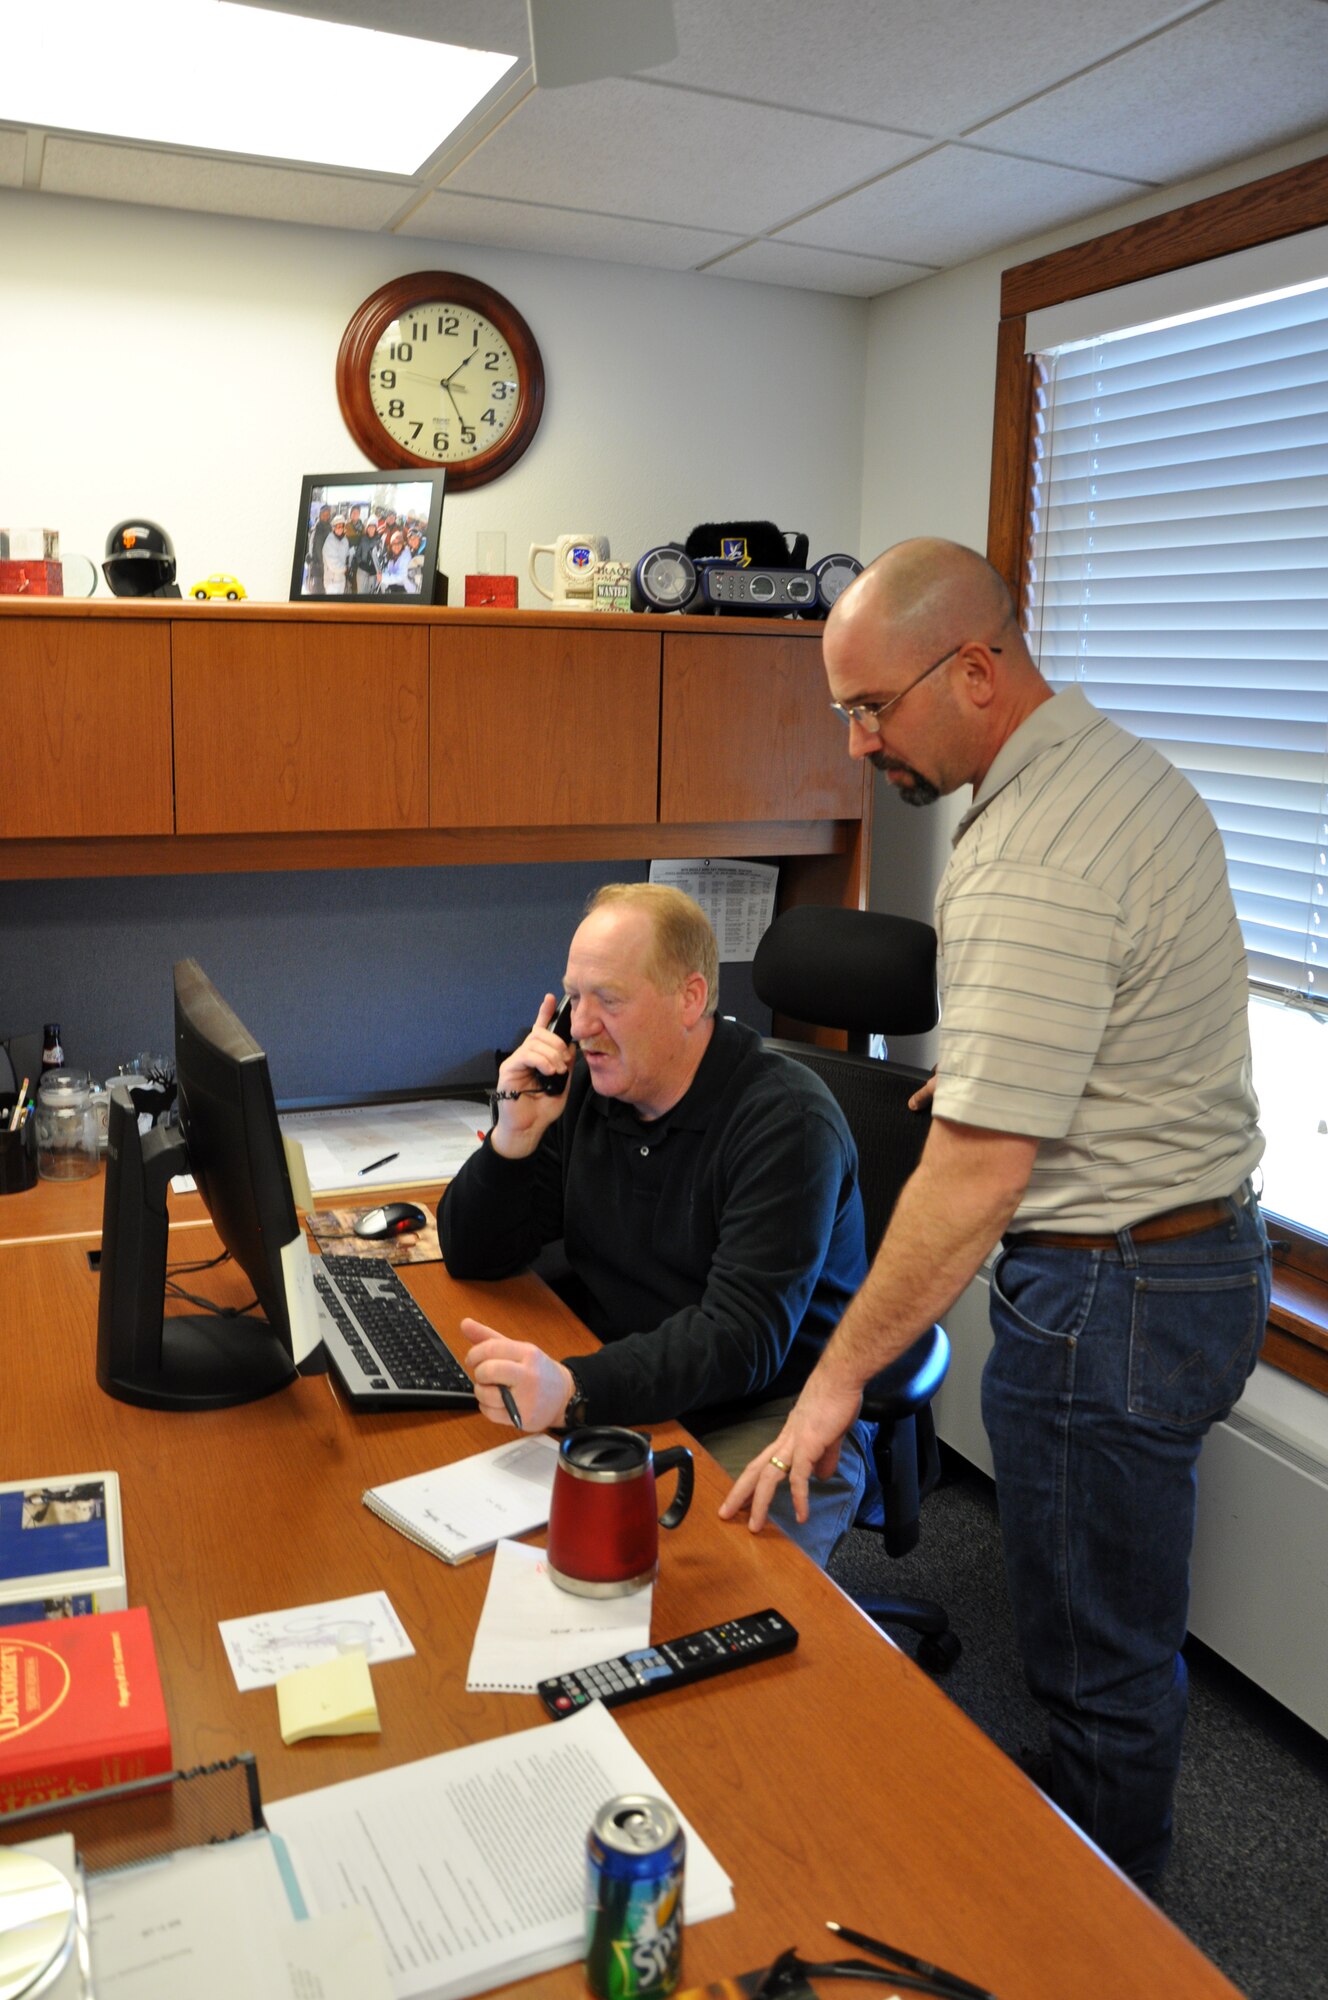 Mark Ragsdale and Kelly Young, both with the 90th Missile Wing Antiterrorism office, look over information in their office here, Jan. 26.  Mr. Ragsdale first arrived at F. E. Warren in 1993 as a security forces member, and returned to work as an AT civilian in 2005.  Mr. Young also arrived here in 2000 as a SF member, and started working in the AT program as a civilian in 2009. (U.S. Air Force photo by 1st Lt. Brooke Brzozowske)